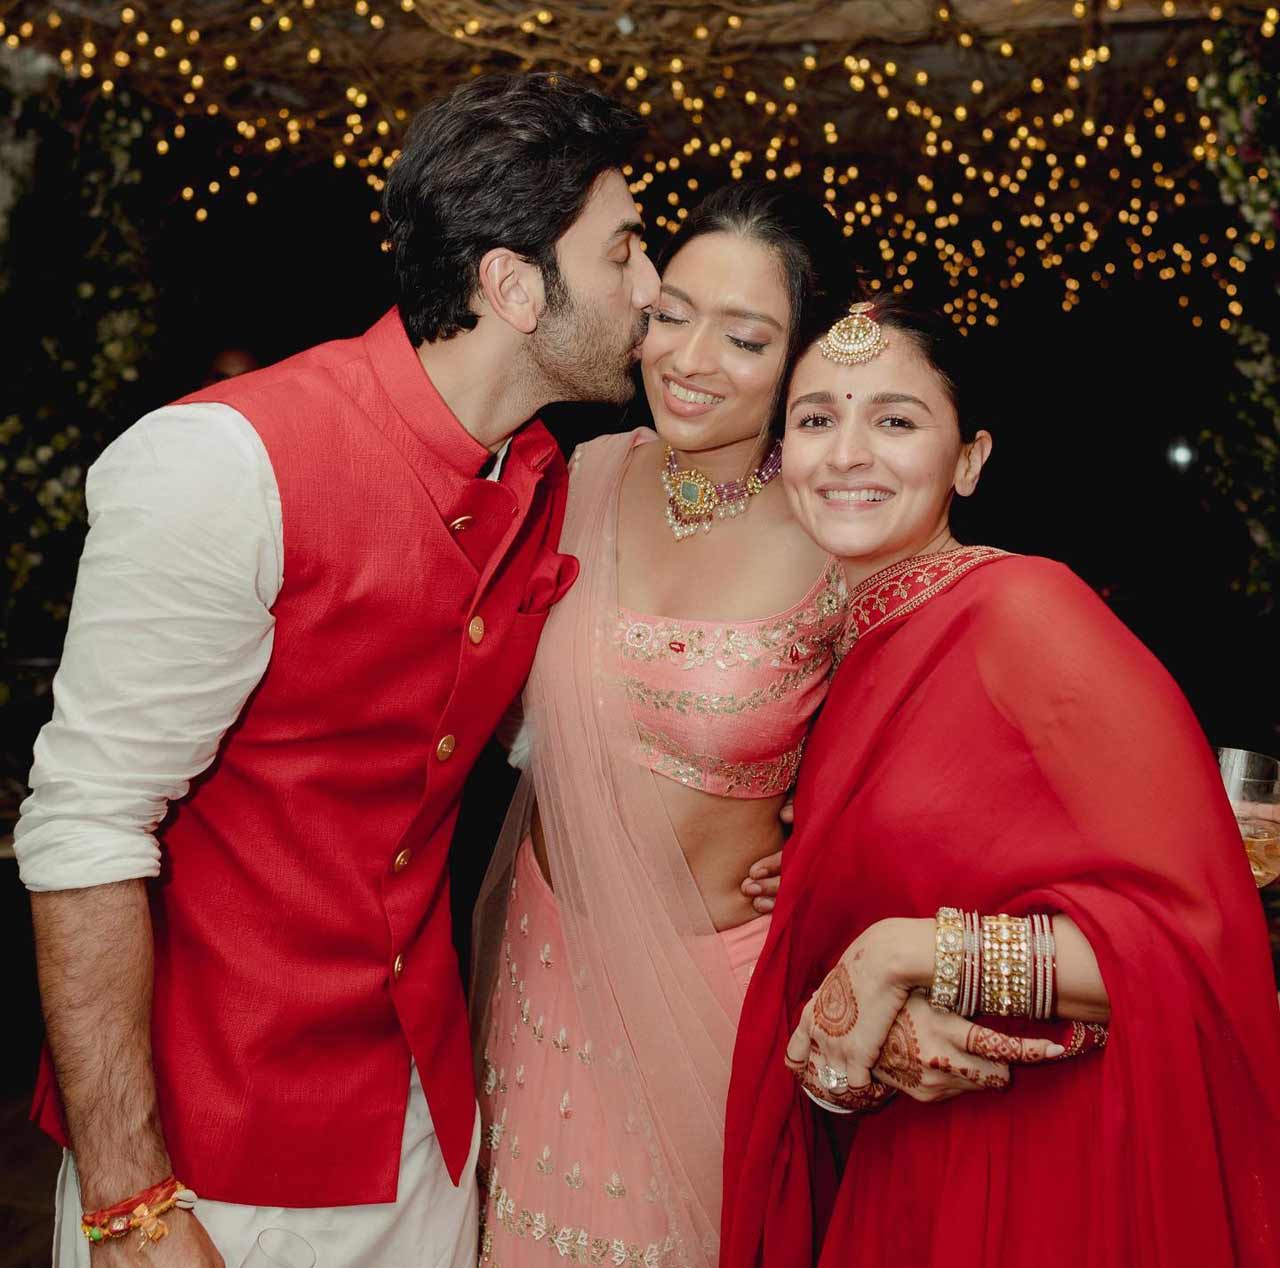 Sharing a series of pictures with the bride and the groom - Alia Bhatt and Ranbir Kapoor, Tanya wrote, 